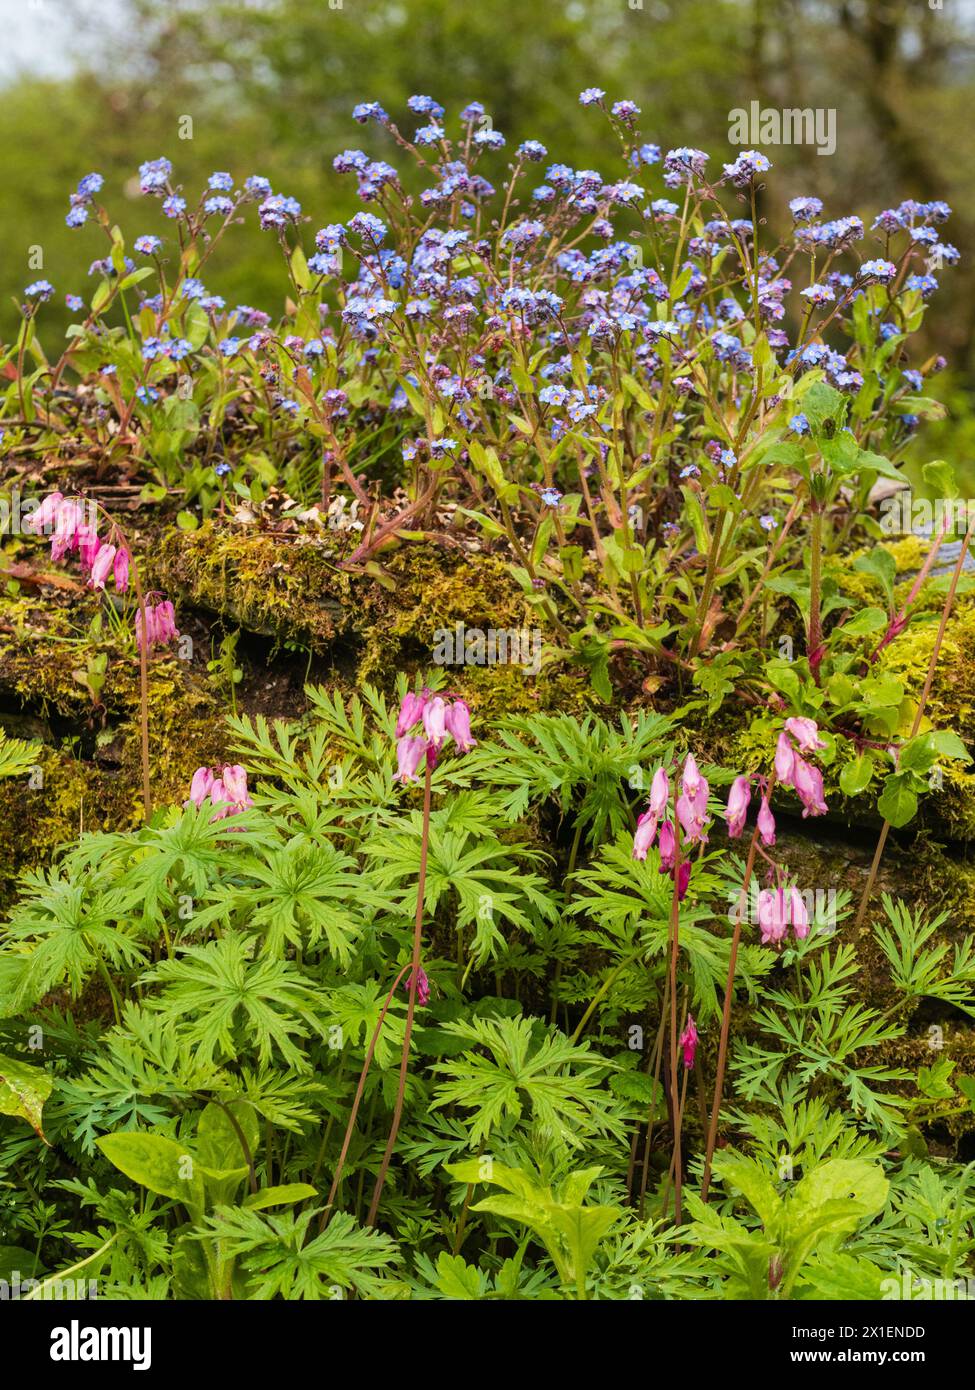 Spring planting combination with the blue forget me not, Myososotis sylvatica and pink, ferny foliaged Dicentra formosa Stock Photo